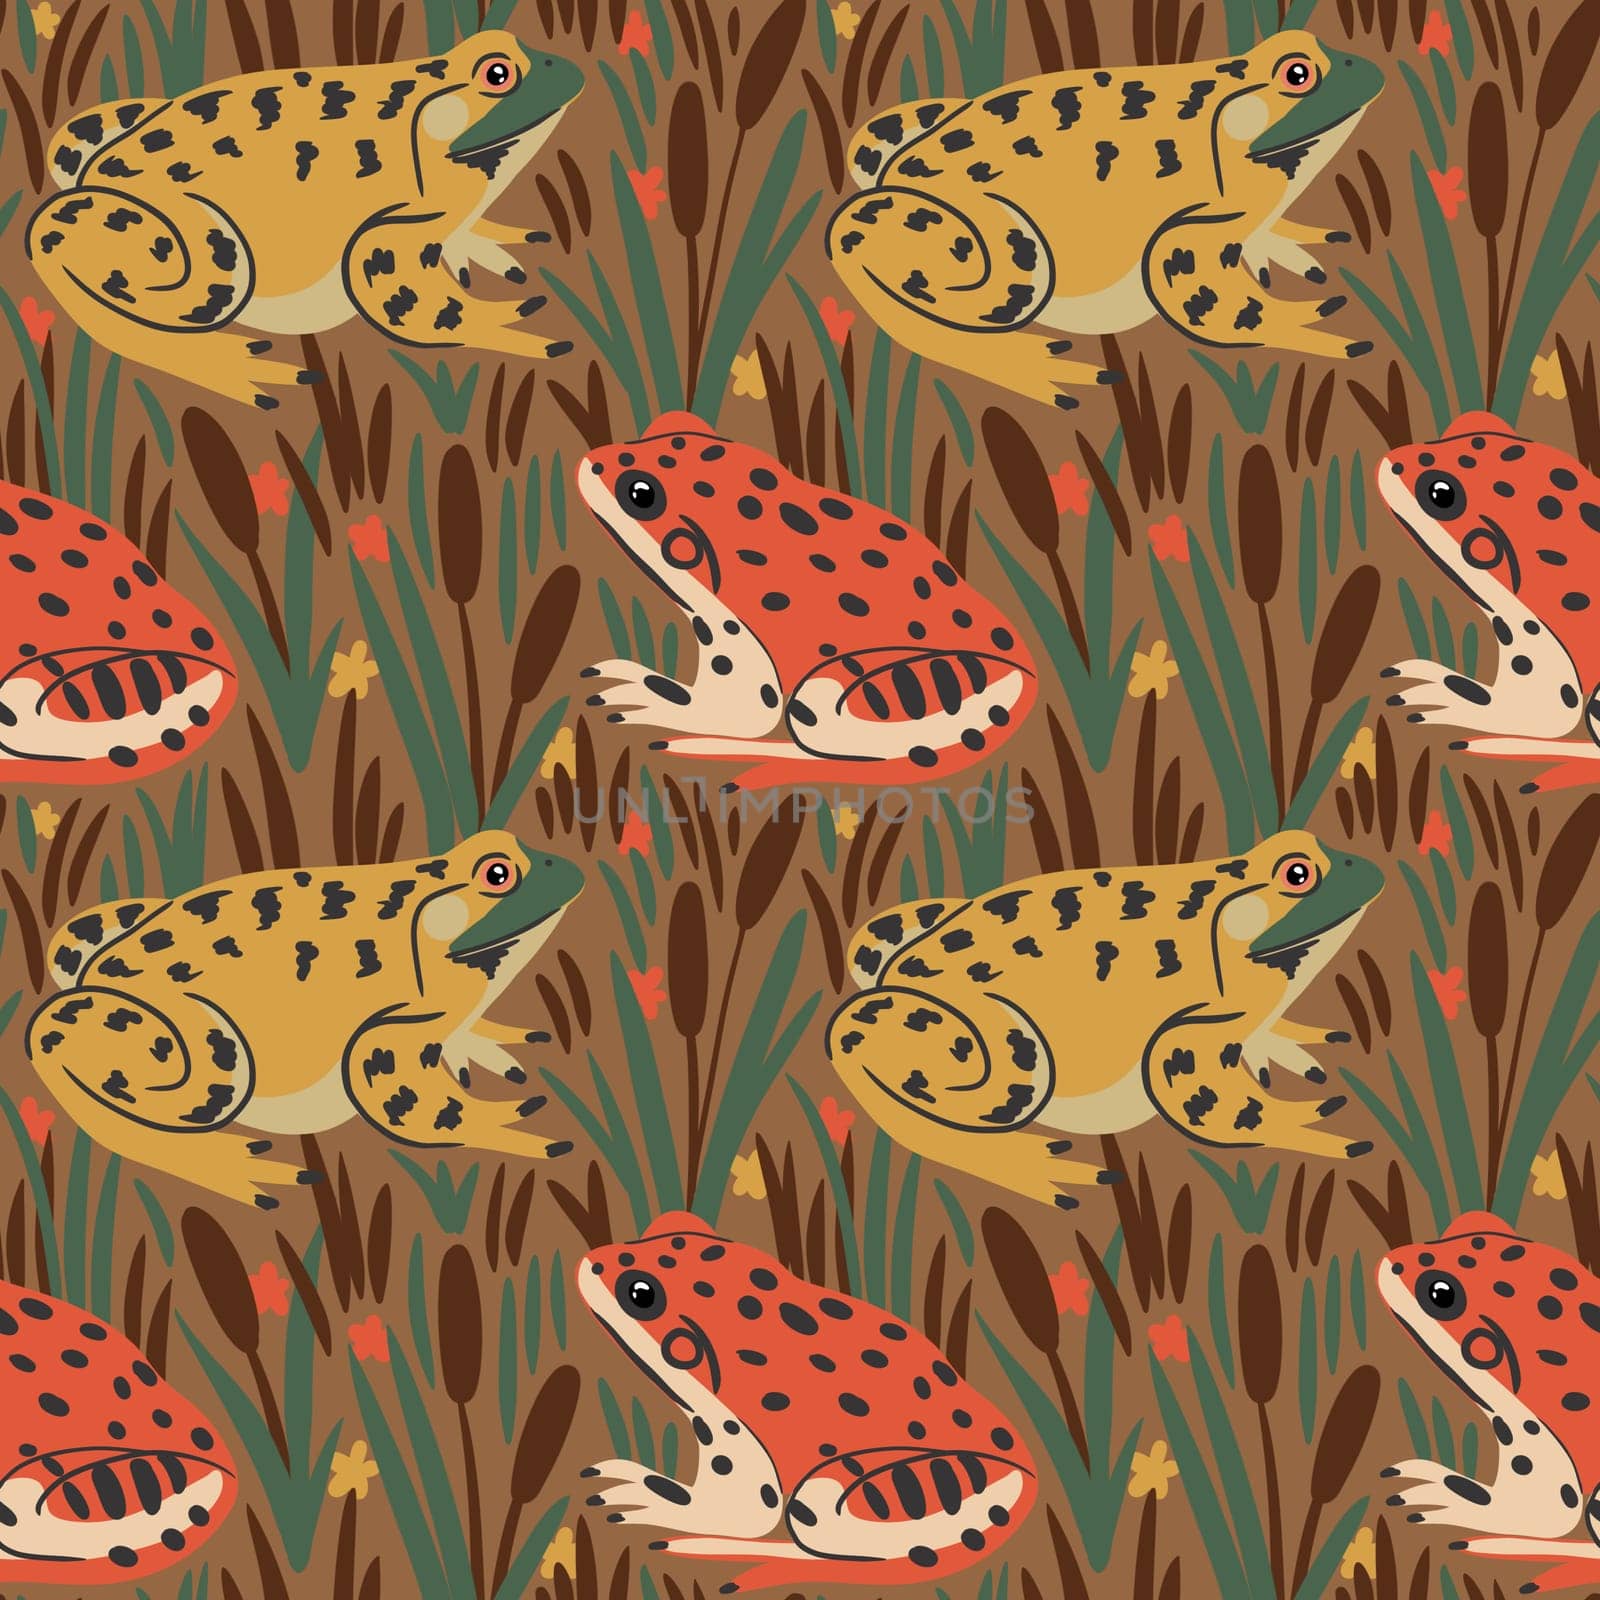 Hand drawn seamless pattern of orange green frogs with cattail plant in swamp moss. Bog plant forest species, marsh wild amphibian wildlife, natural reptile toad